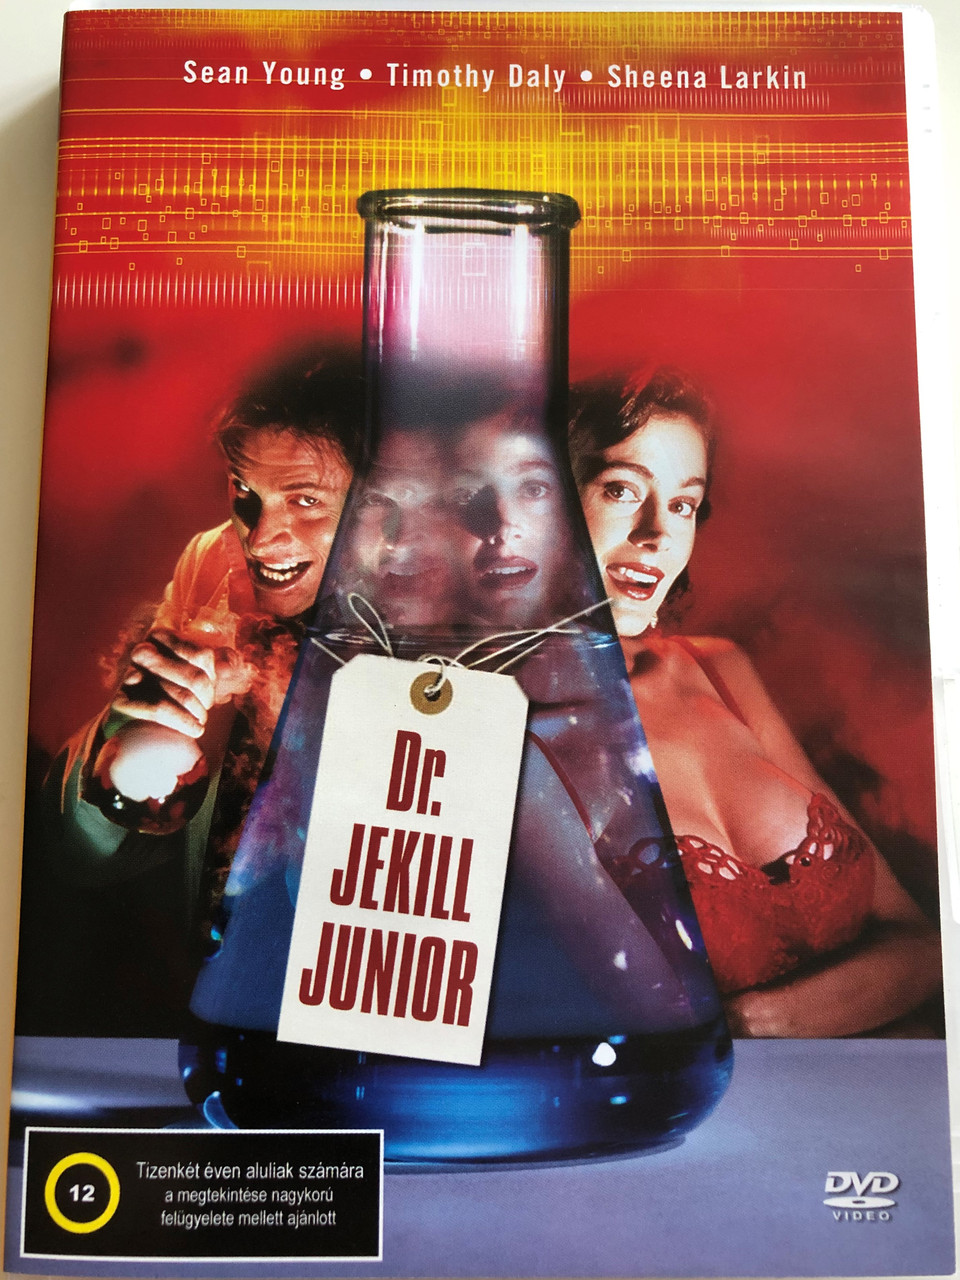 Dr. Jekyll and Ms. Hyde DVD 1995 Dr. Jekill Junior / Directed by David  Price / Starring: Sean Young, Tim Daly, Lysette Anthony, Harvey Fierstein,  Stephen Tobolowsky, Jeremy Piven - bibleinmylanguage